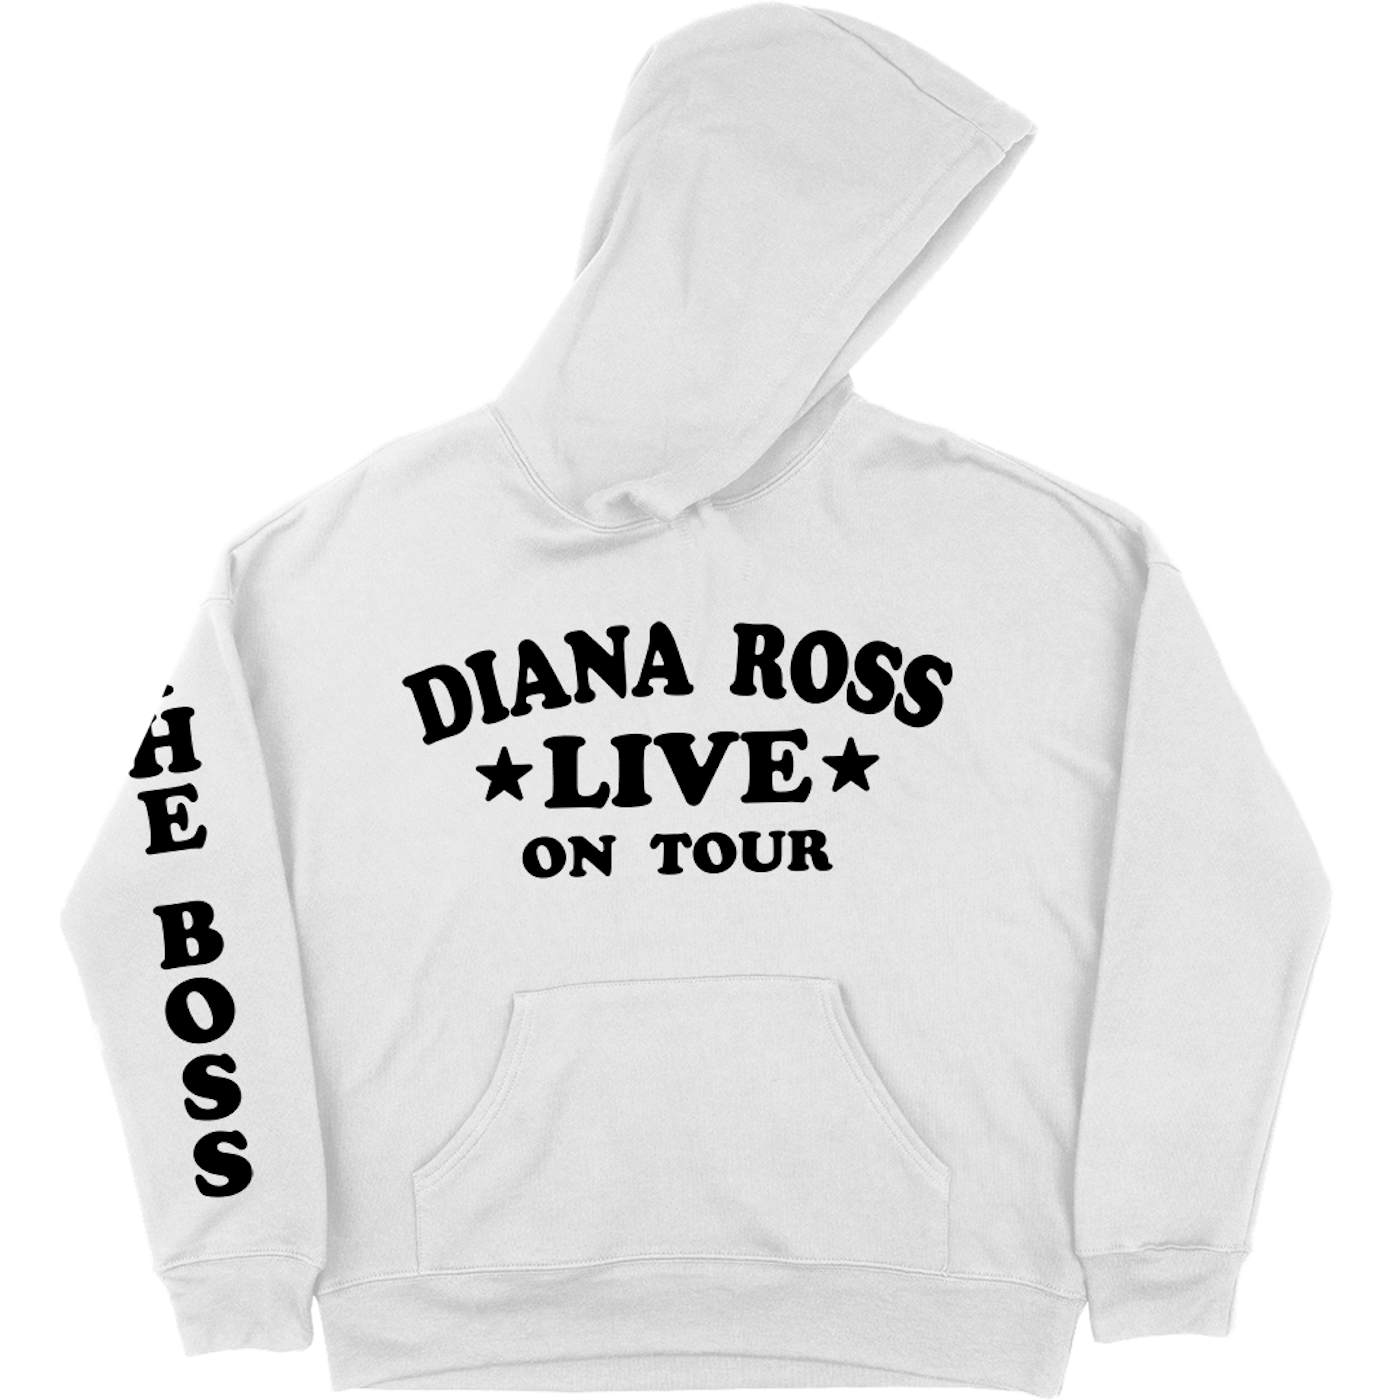 Diana Ross "Live On Tour" Pullover Hoodie in White